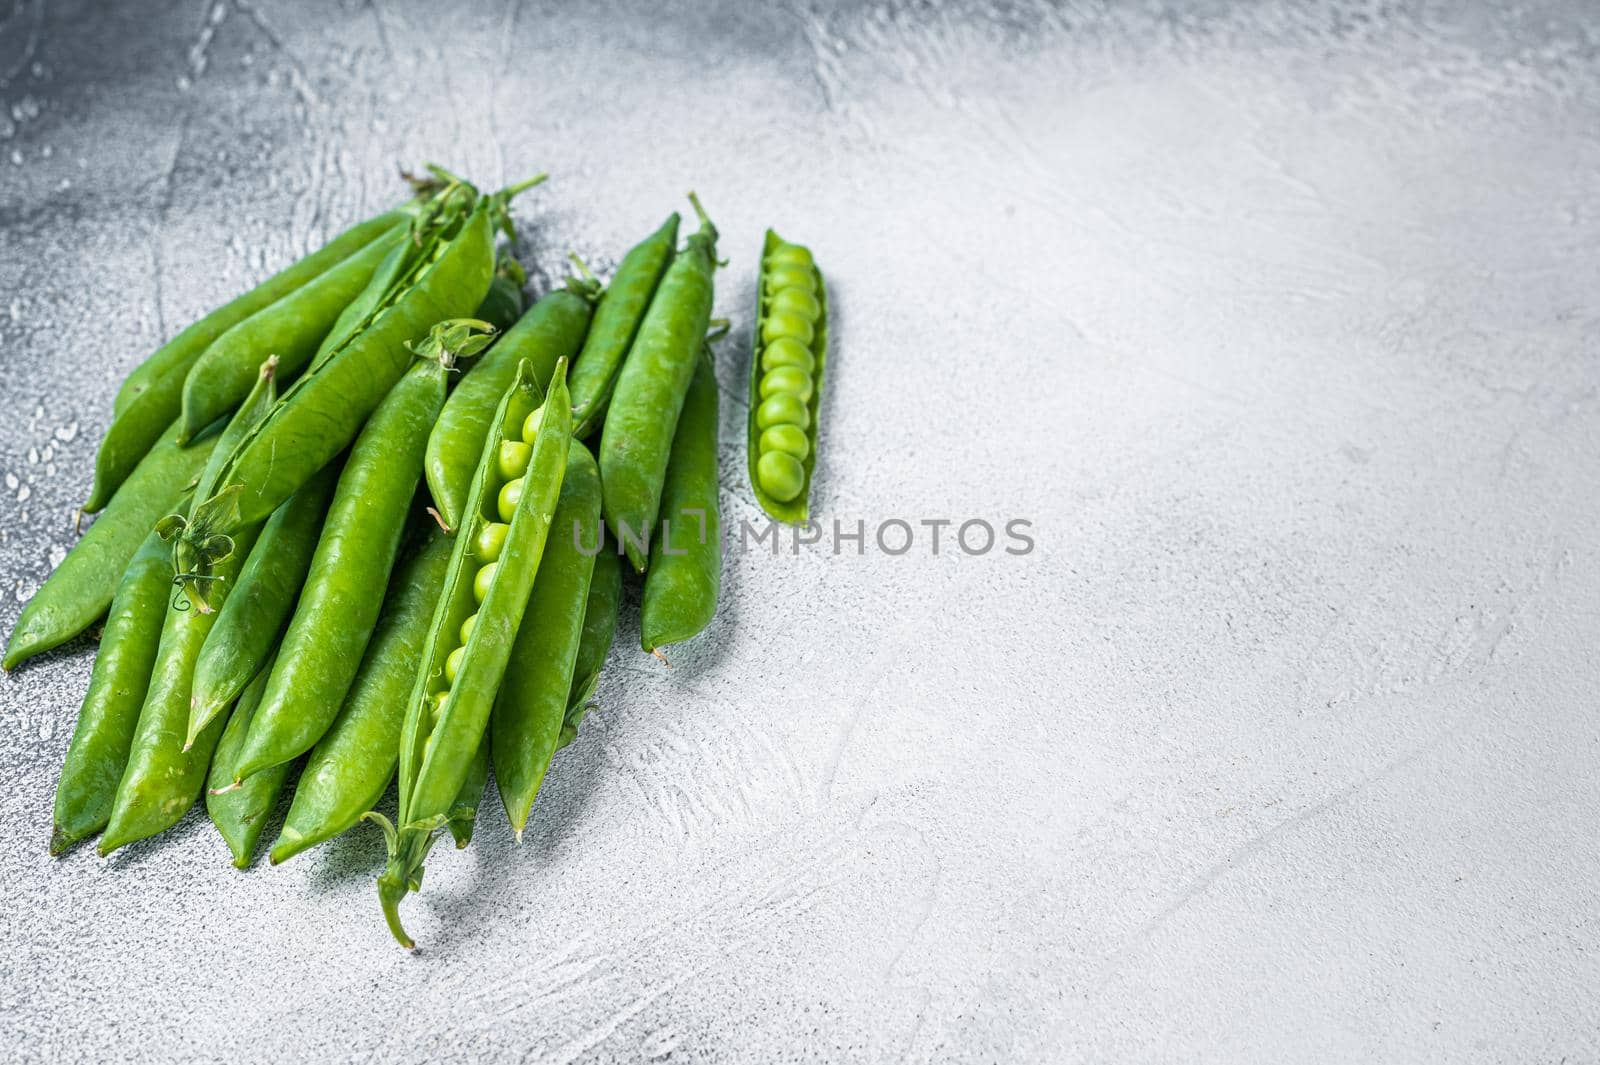 Peas and green pea pods on a kitchen table. White background. Top view. Copy space by Composter